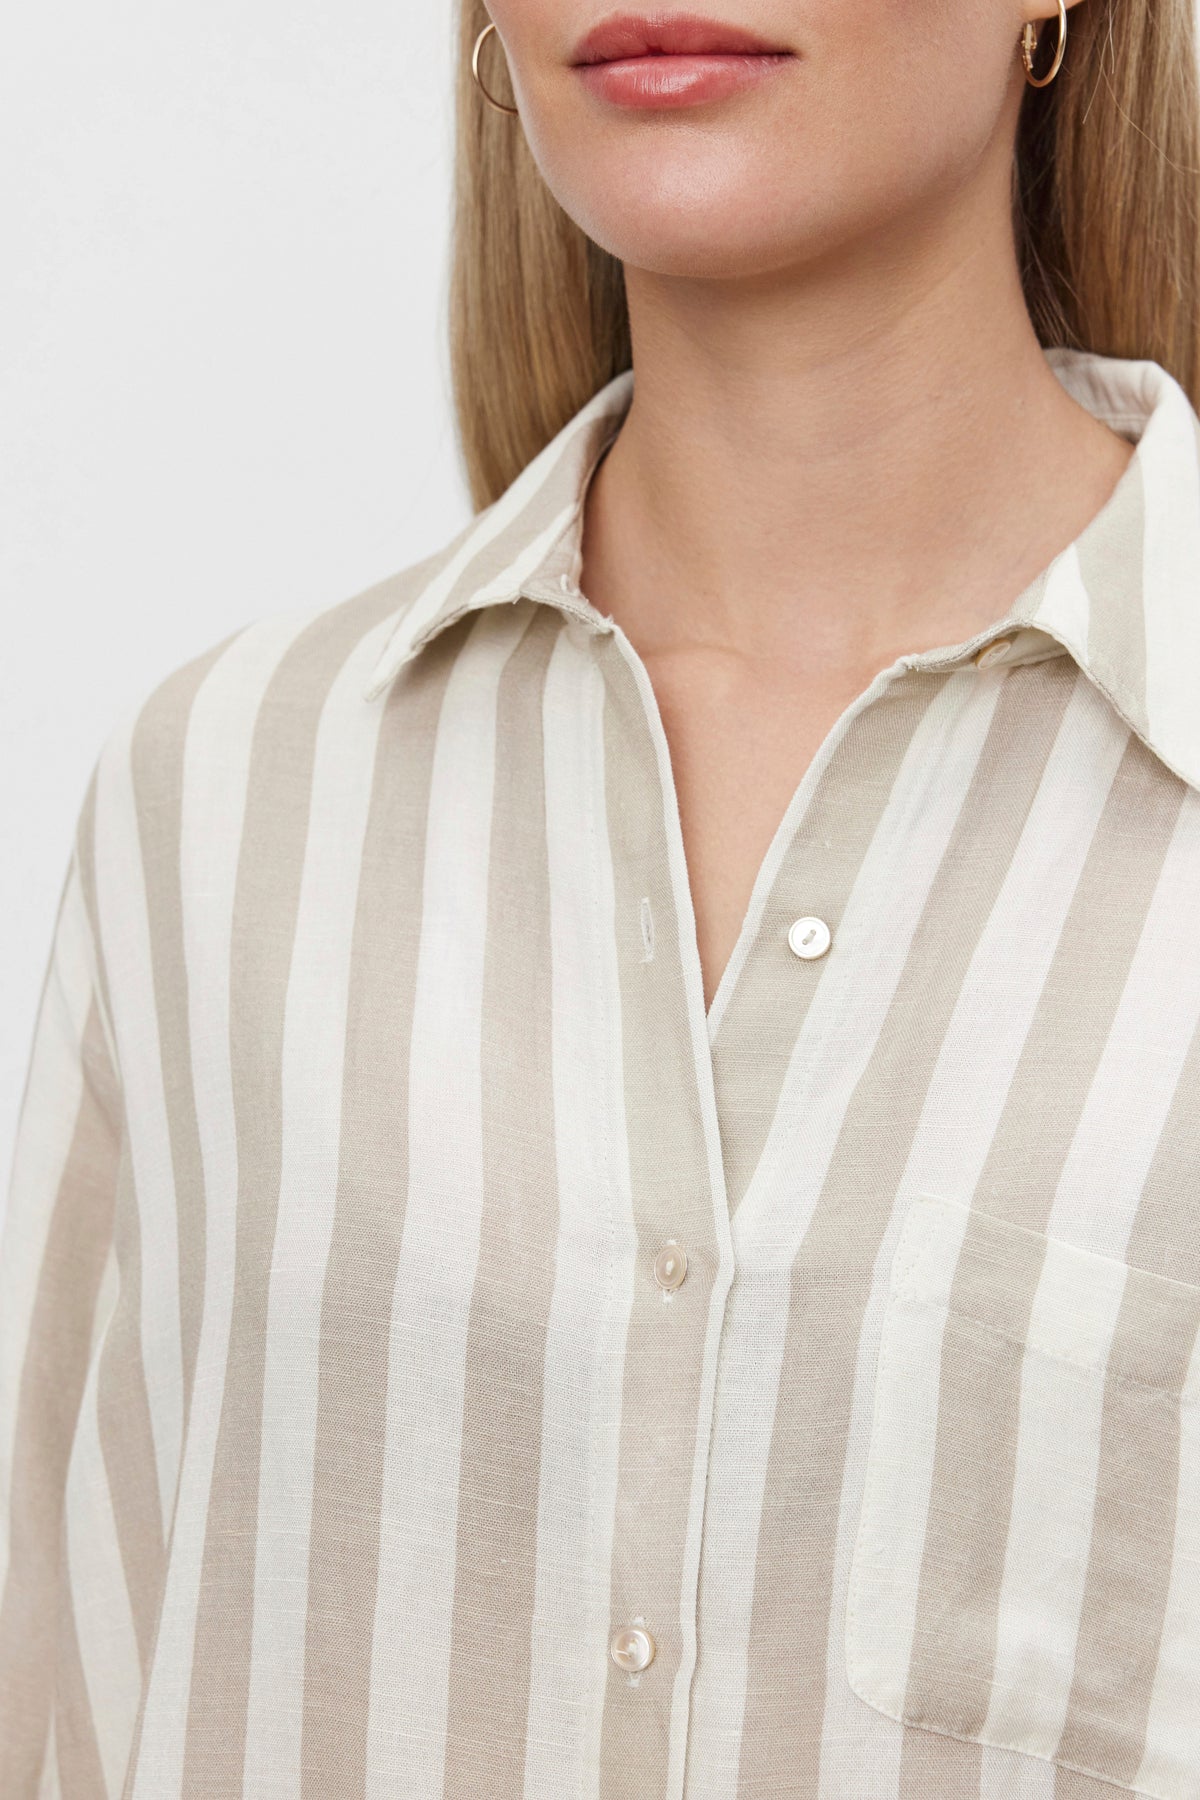 A person wearing the HARLOW STRIPED LINEN BUTTON-UP SHIRT by Velvet by Graham & Spencer. The beige and white vertically striped shirt features a collar, and its relaxed fit complements the timeless stripes perfectly. The person's face is partially visible, with focus on the upper torso and shirt details.-37618482708673